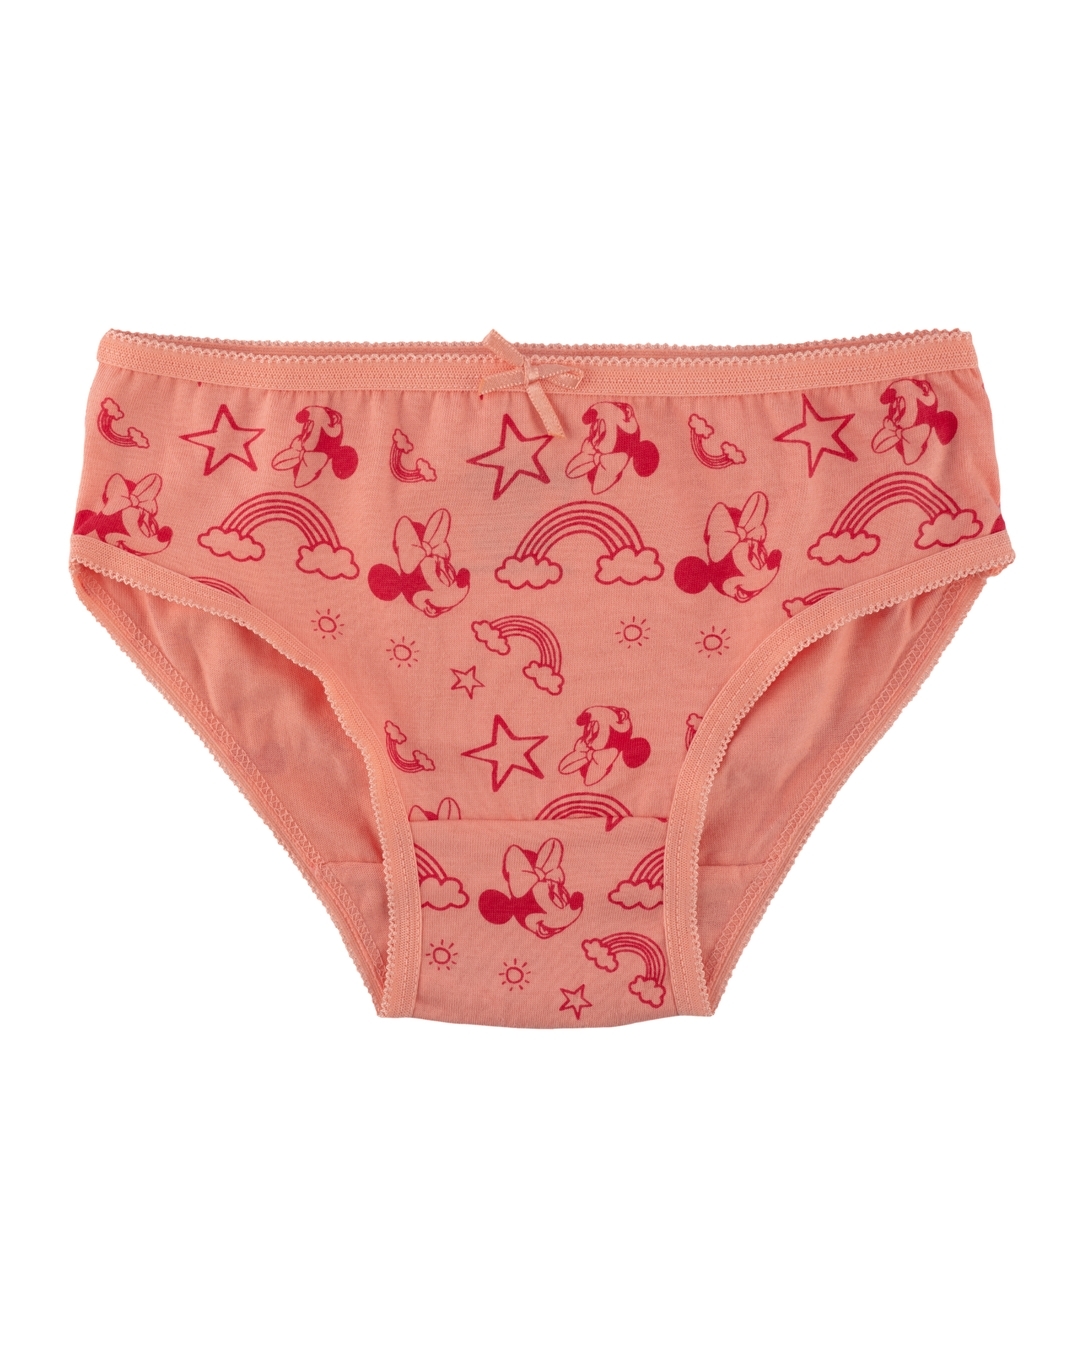 Minnie Mouse, Girls Underwear, 8 Pack 100% Combed Cotton Panties